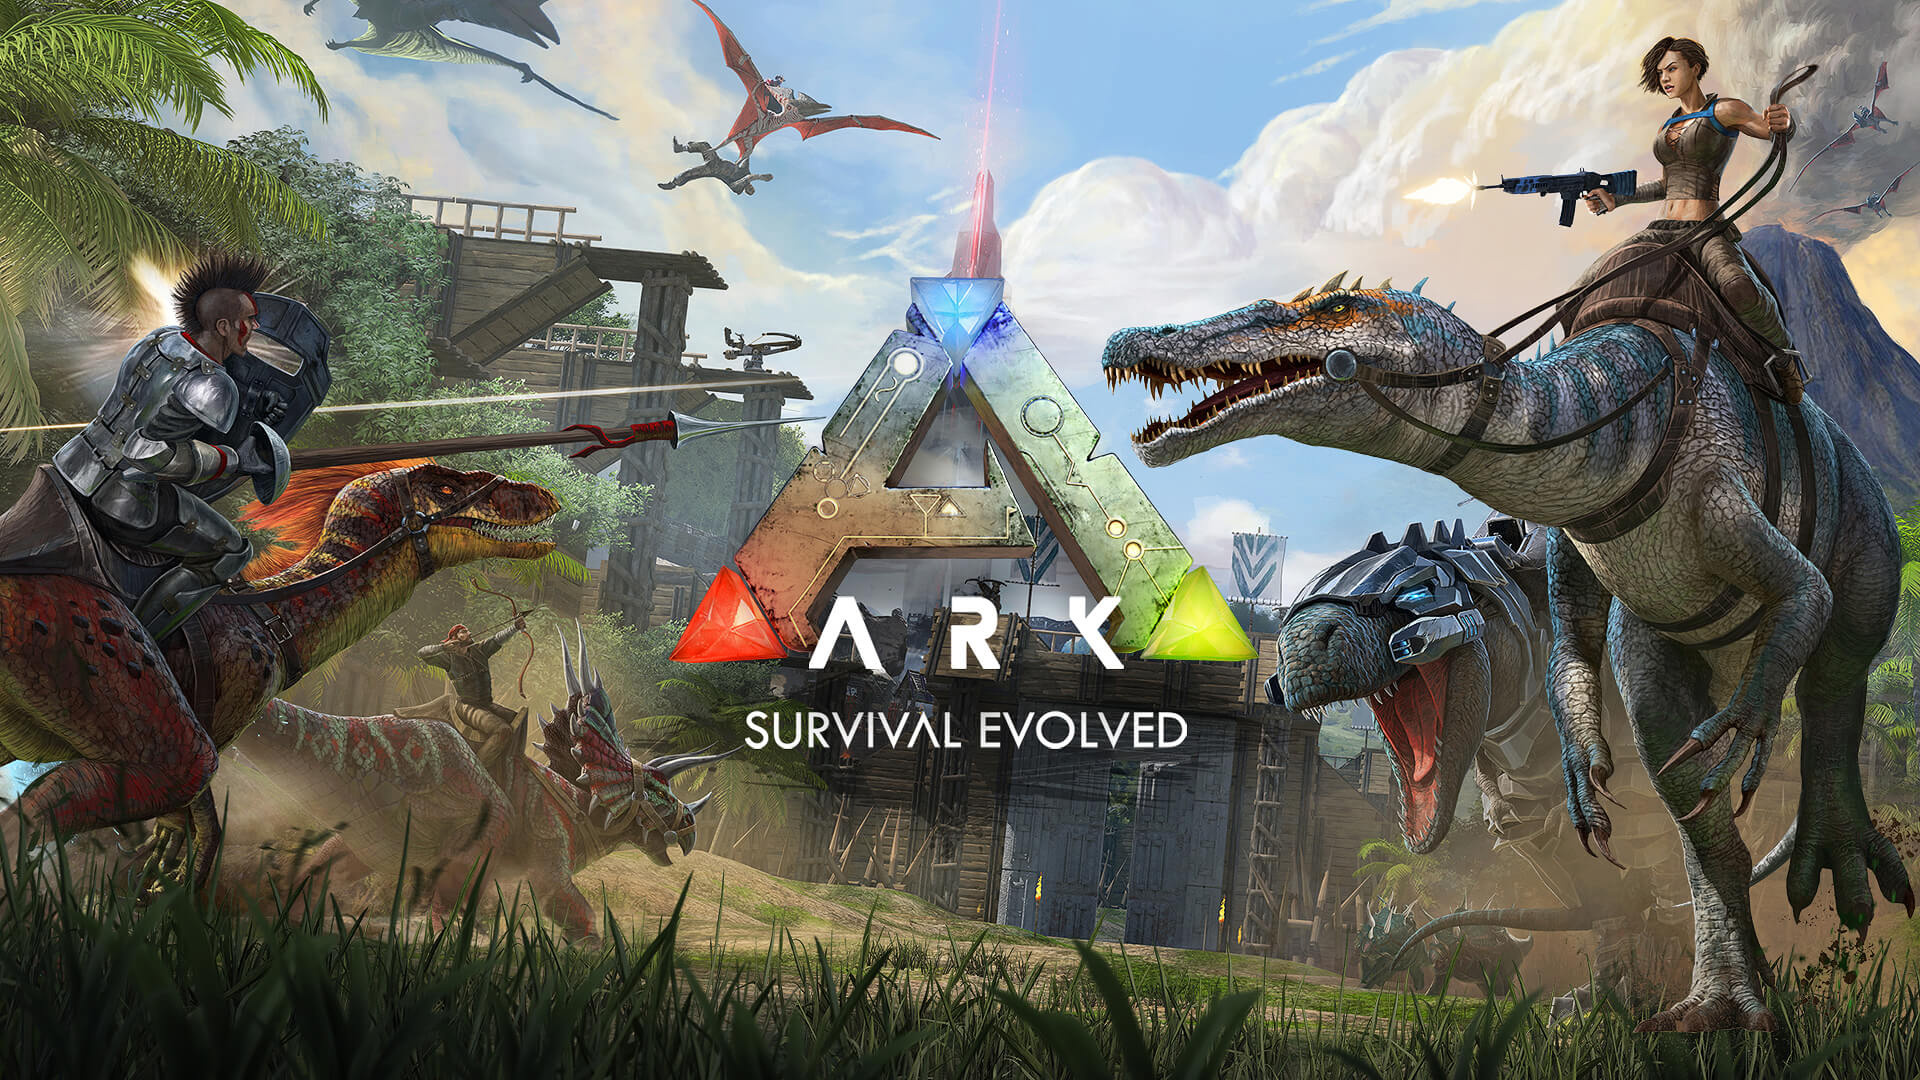 ARK: Survival Evolved: A primeval remain alive game developed by Studio Wildcard. 1920x1080 Full HD Wallpaper.